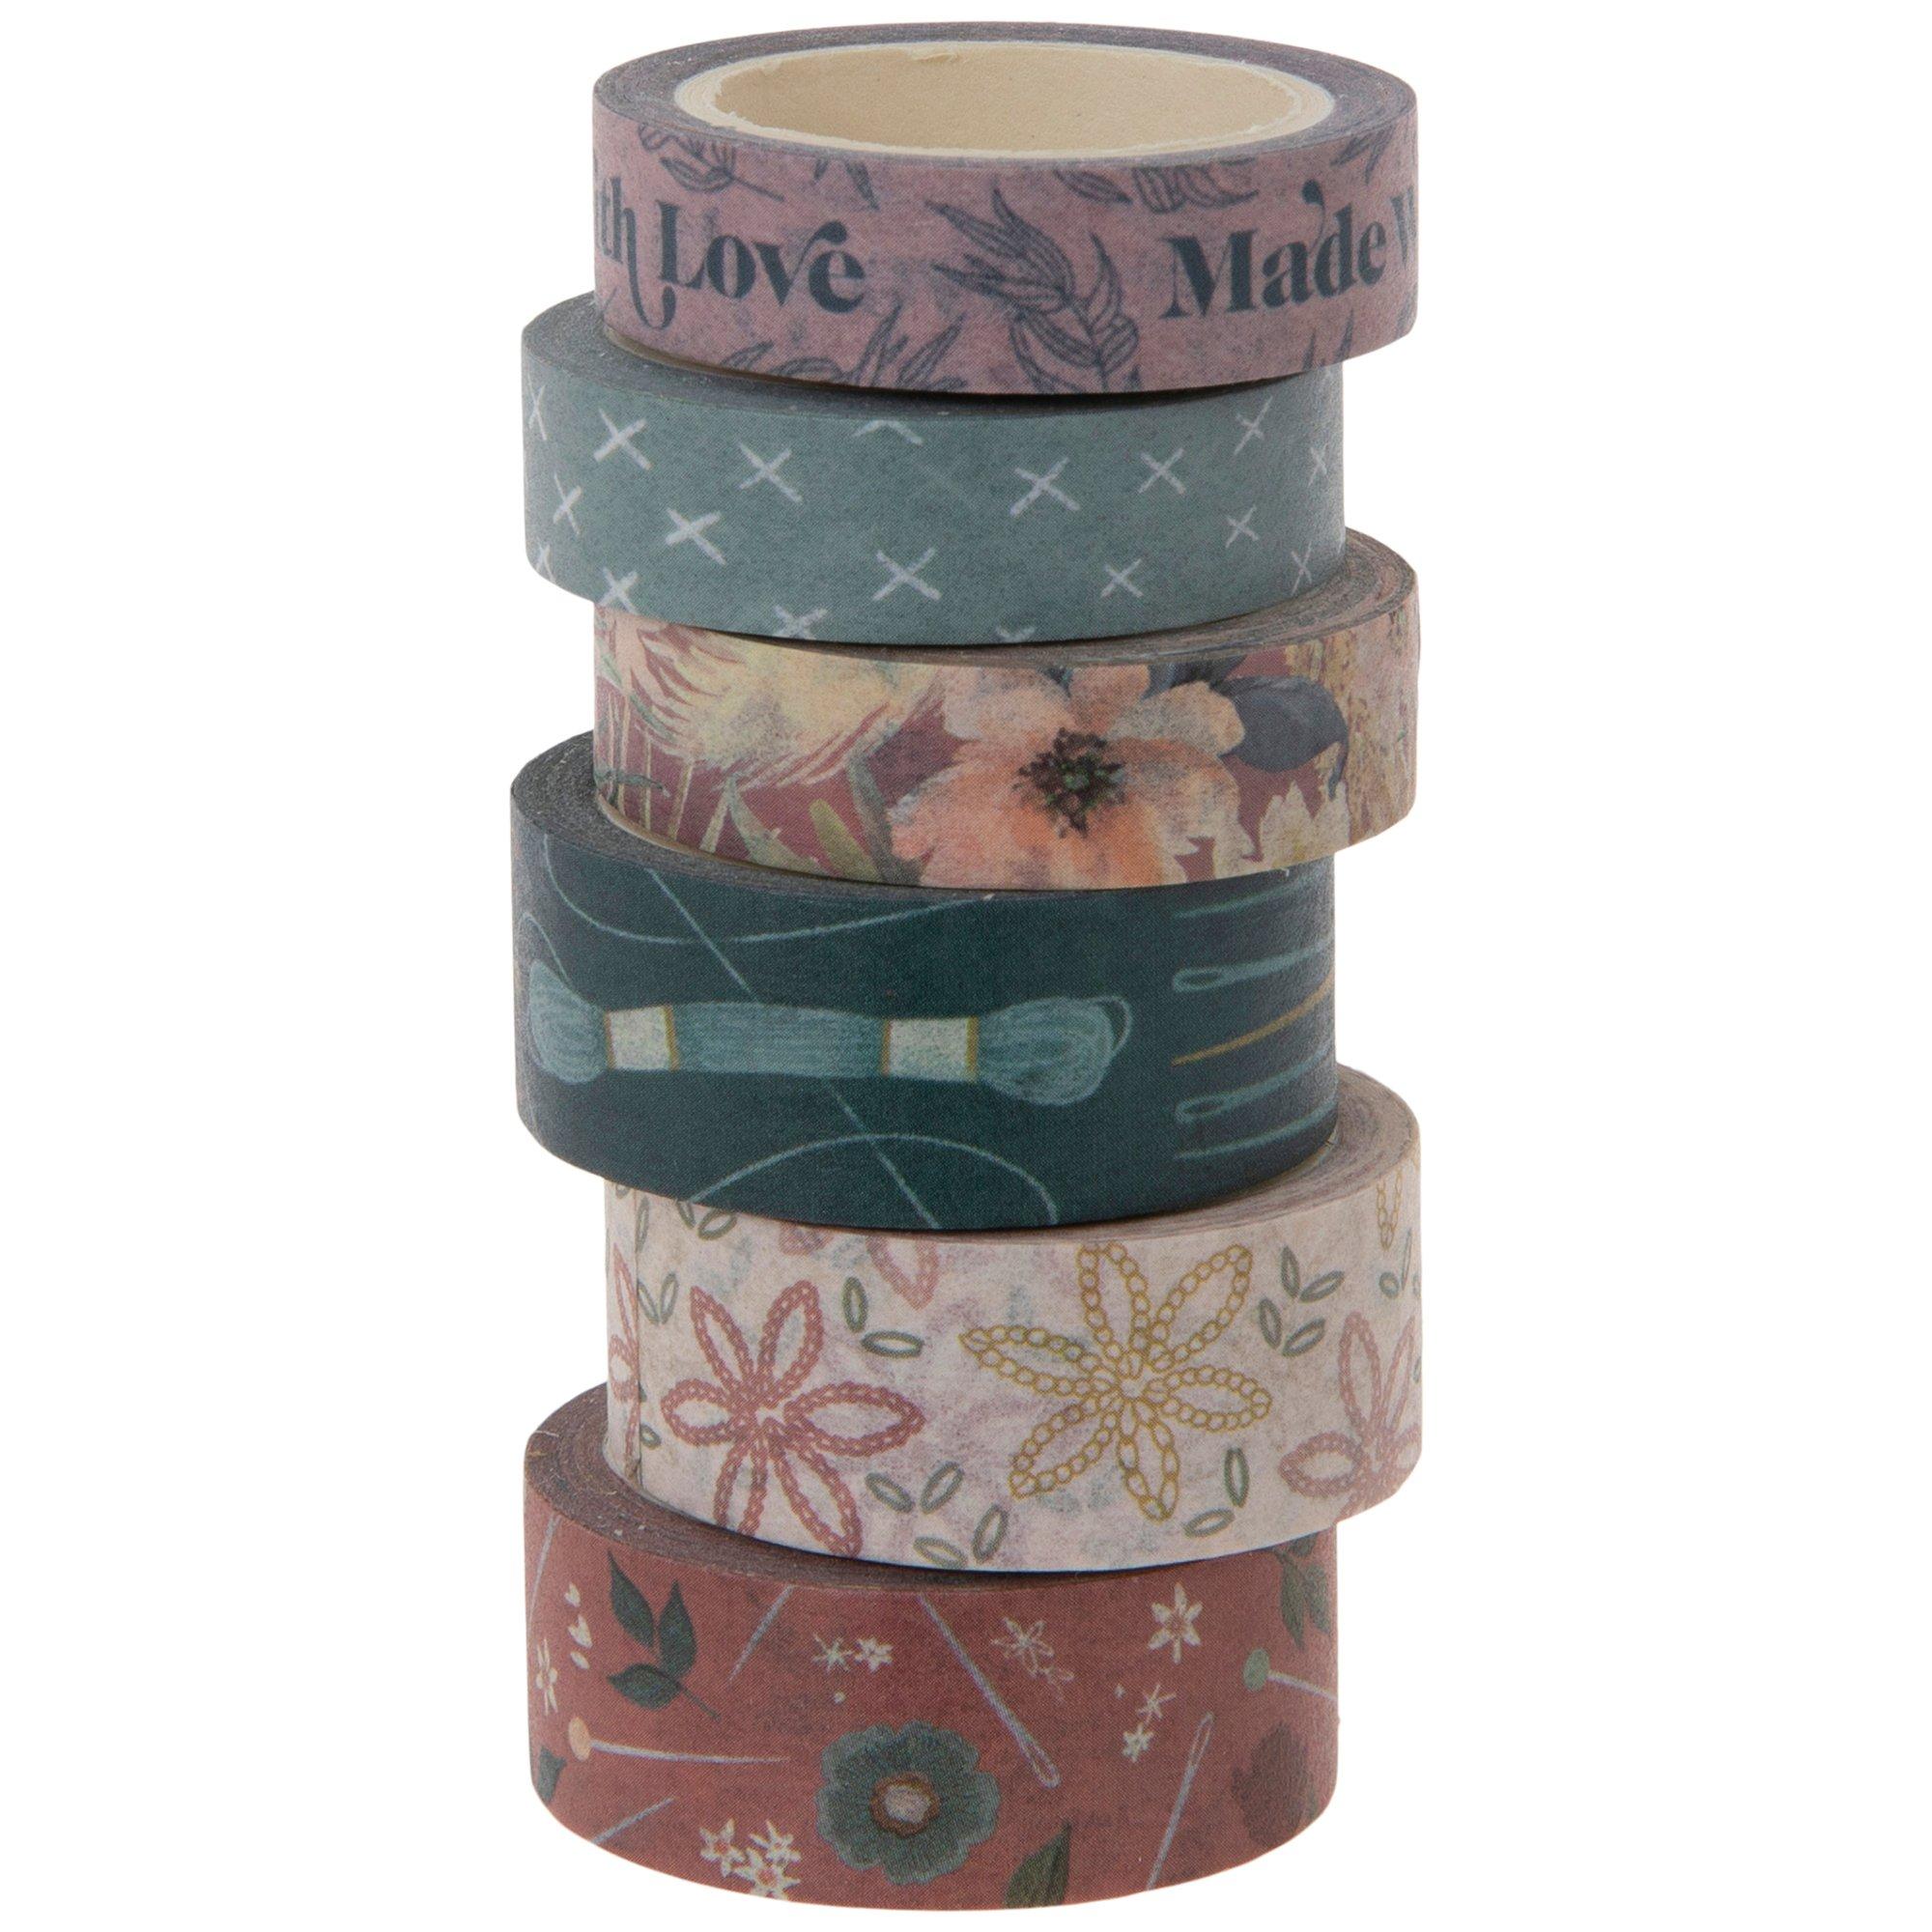 Pressed Floral Washi Tape, Hobby Lobby